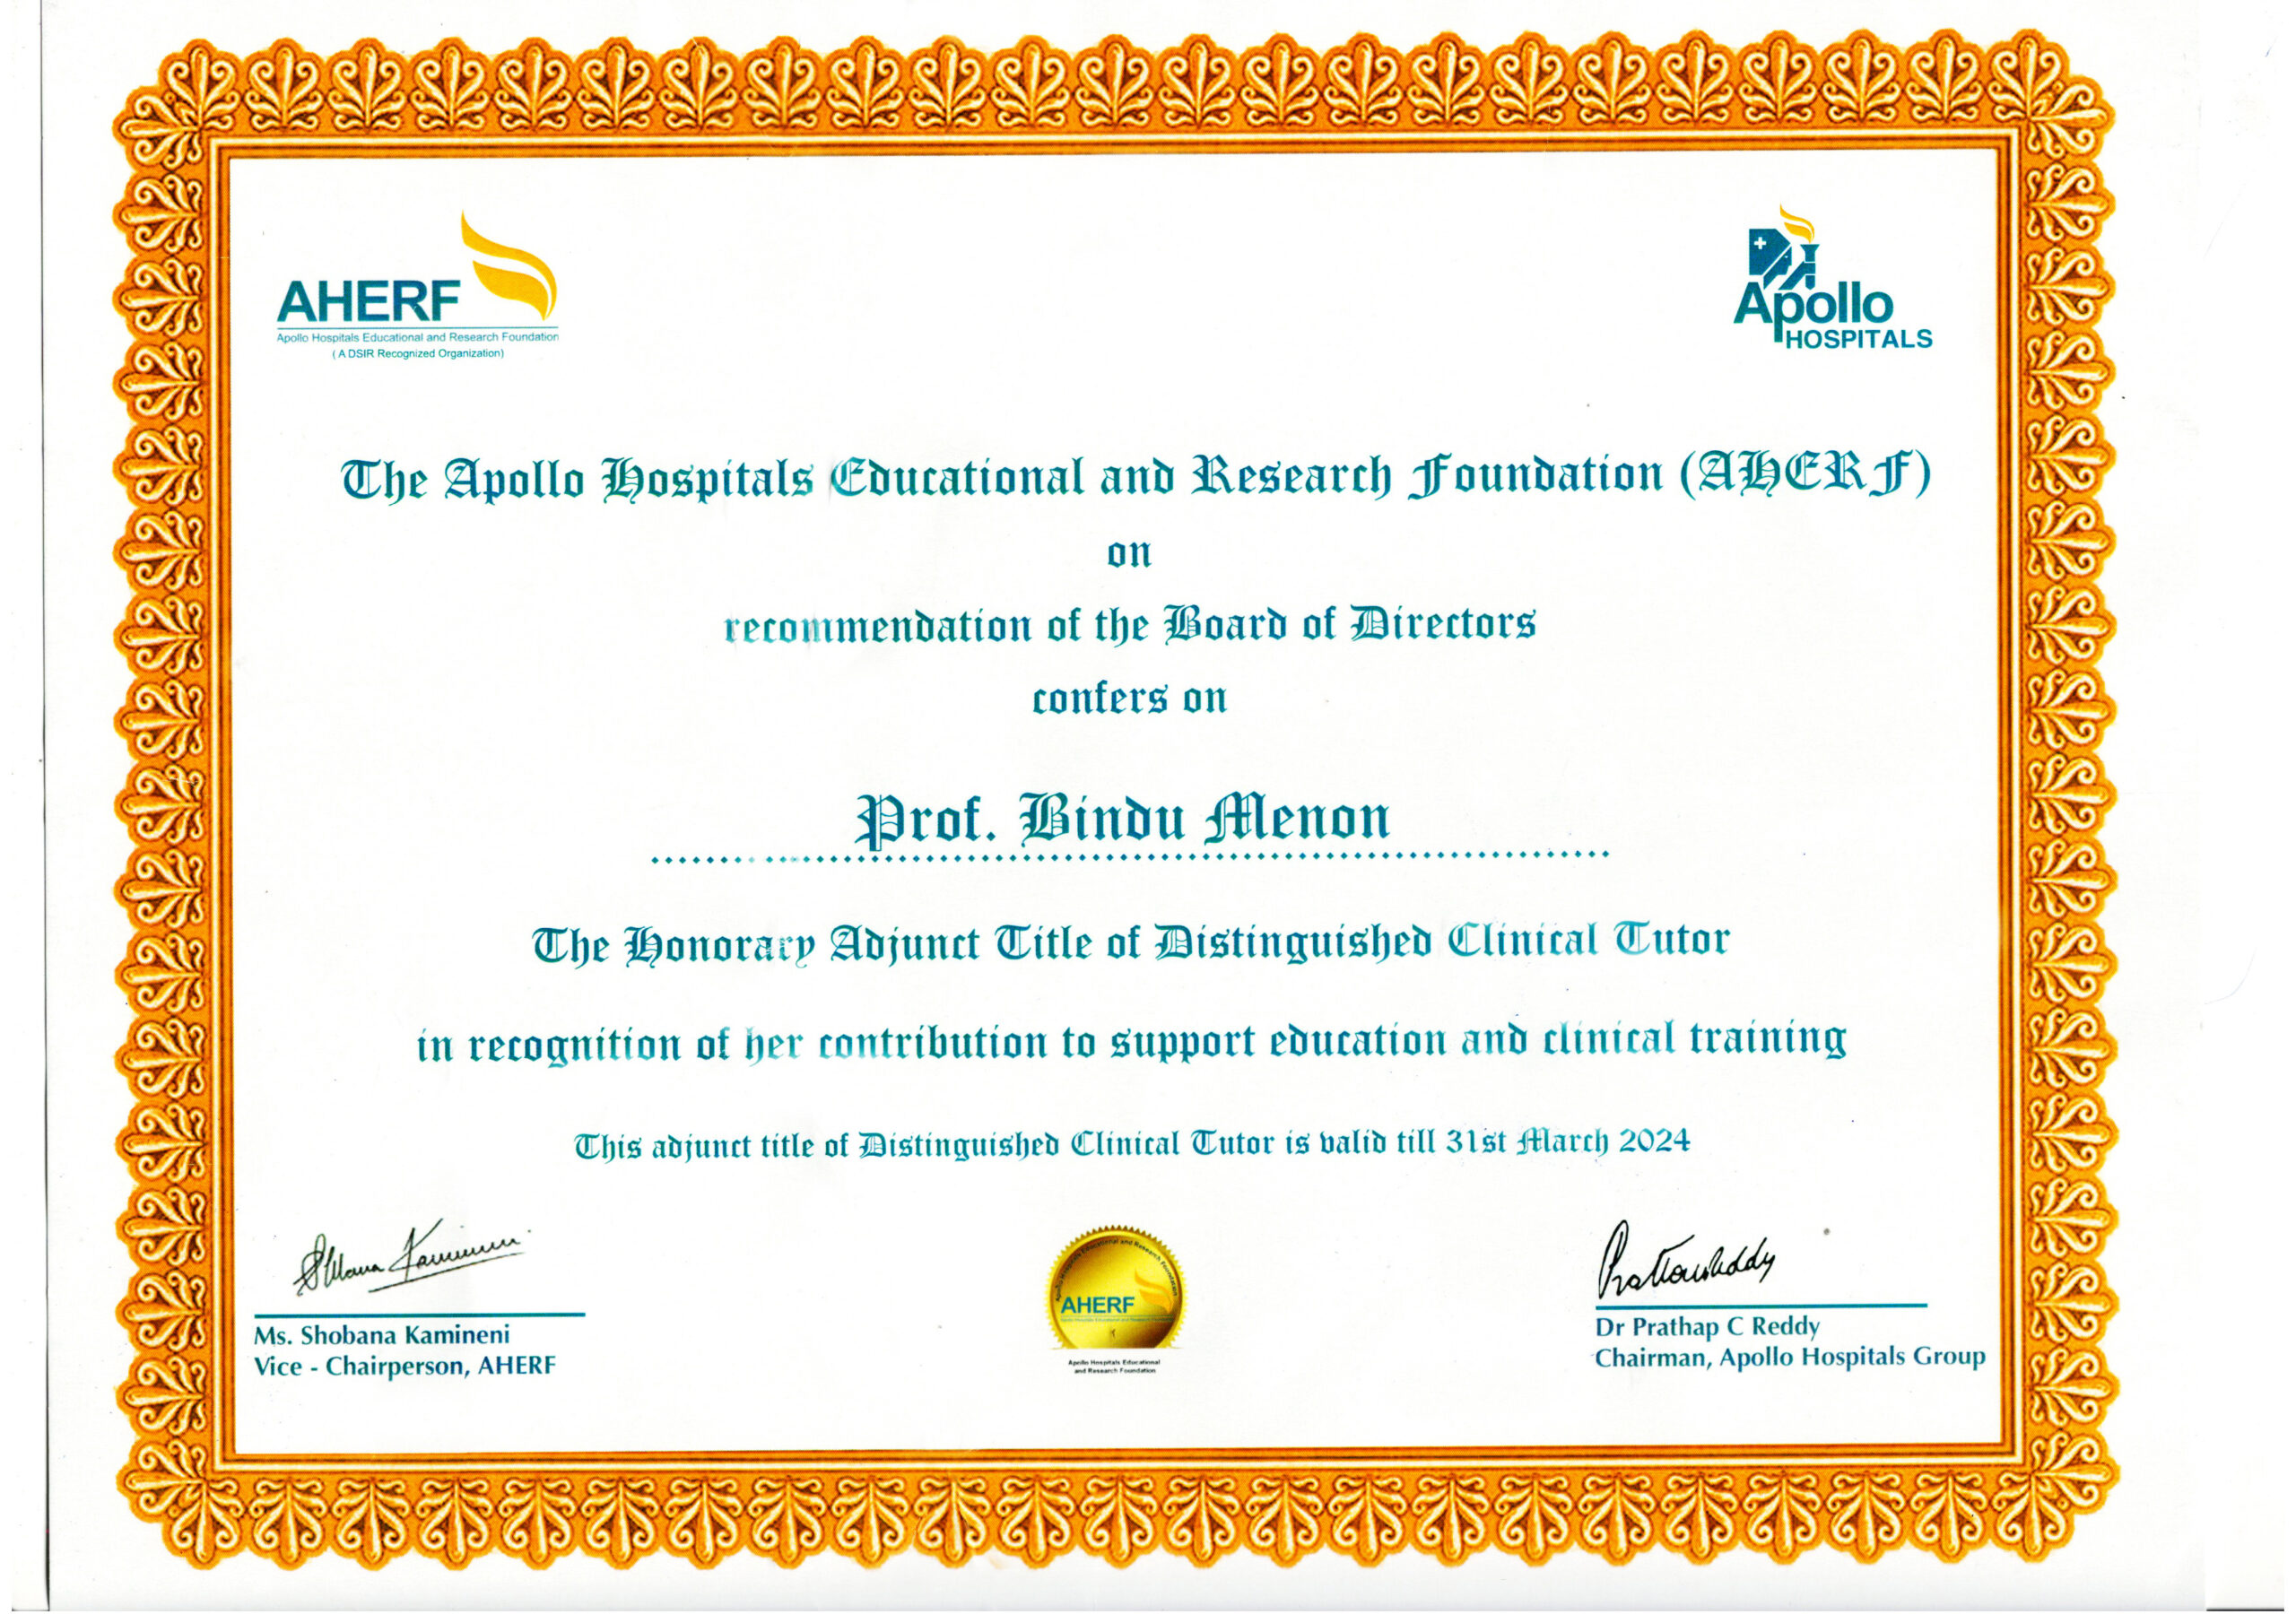 " Distinguished Clinical Tutor" award from AHERF